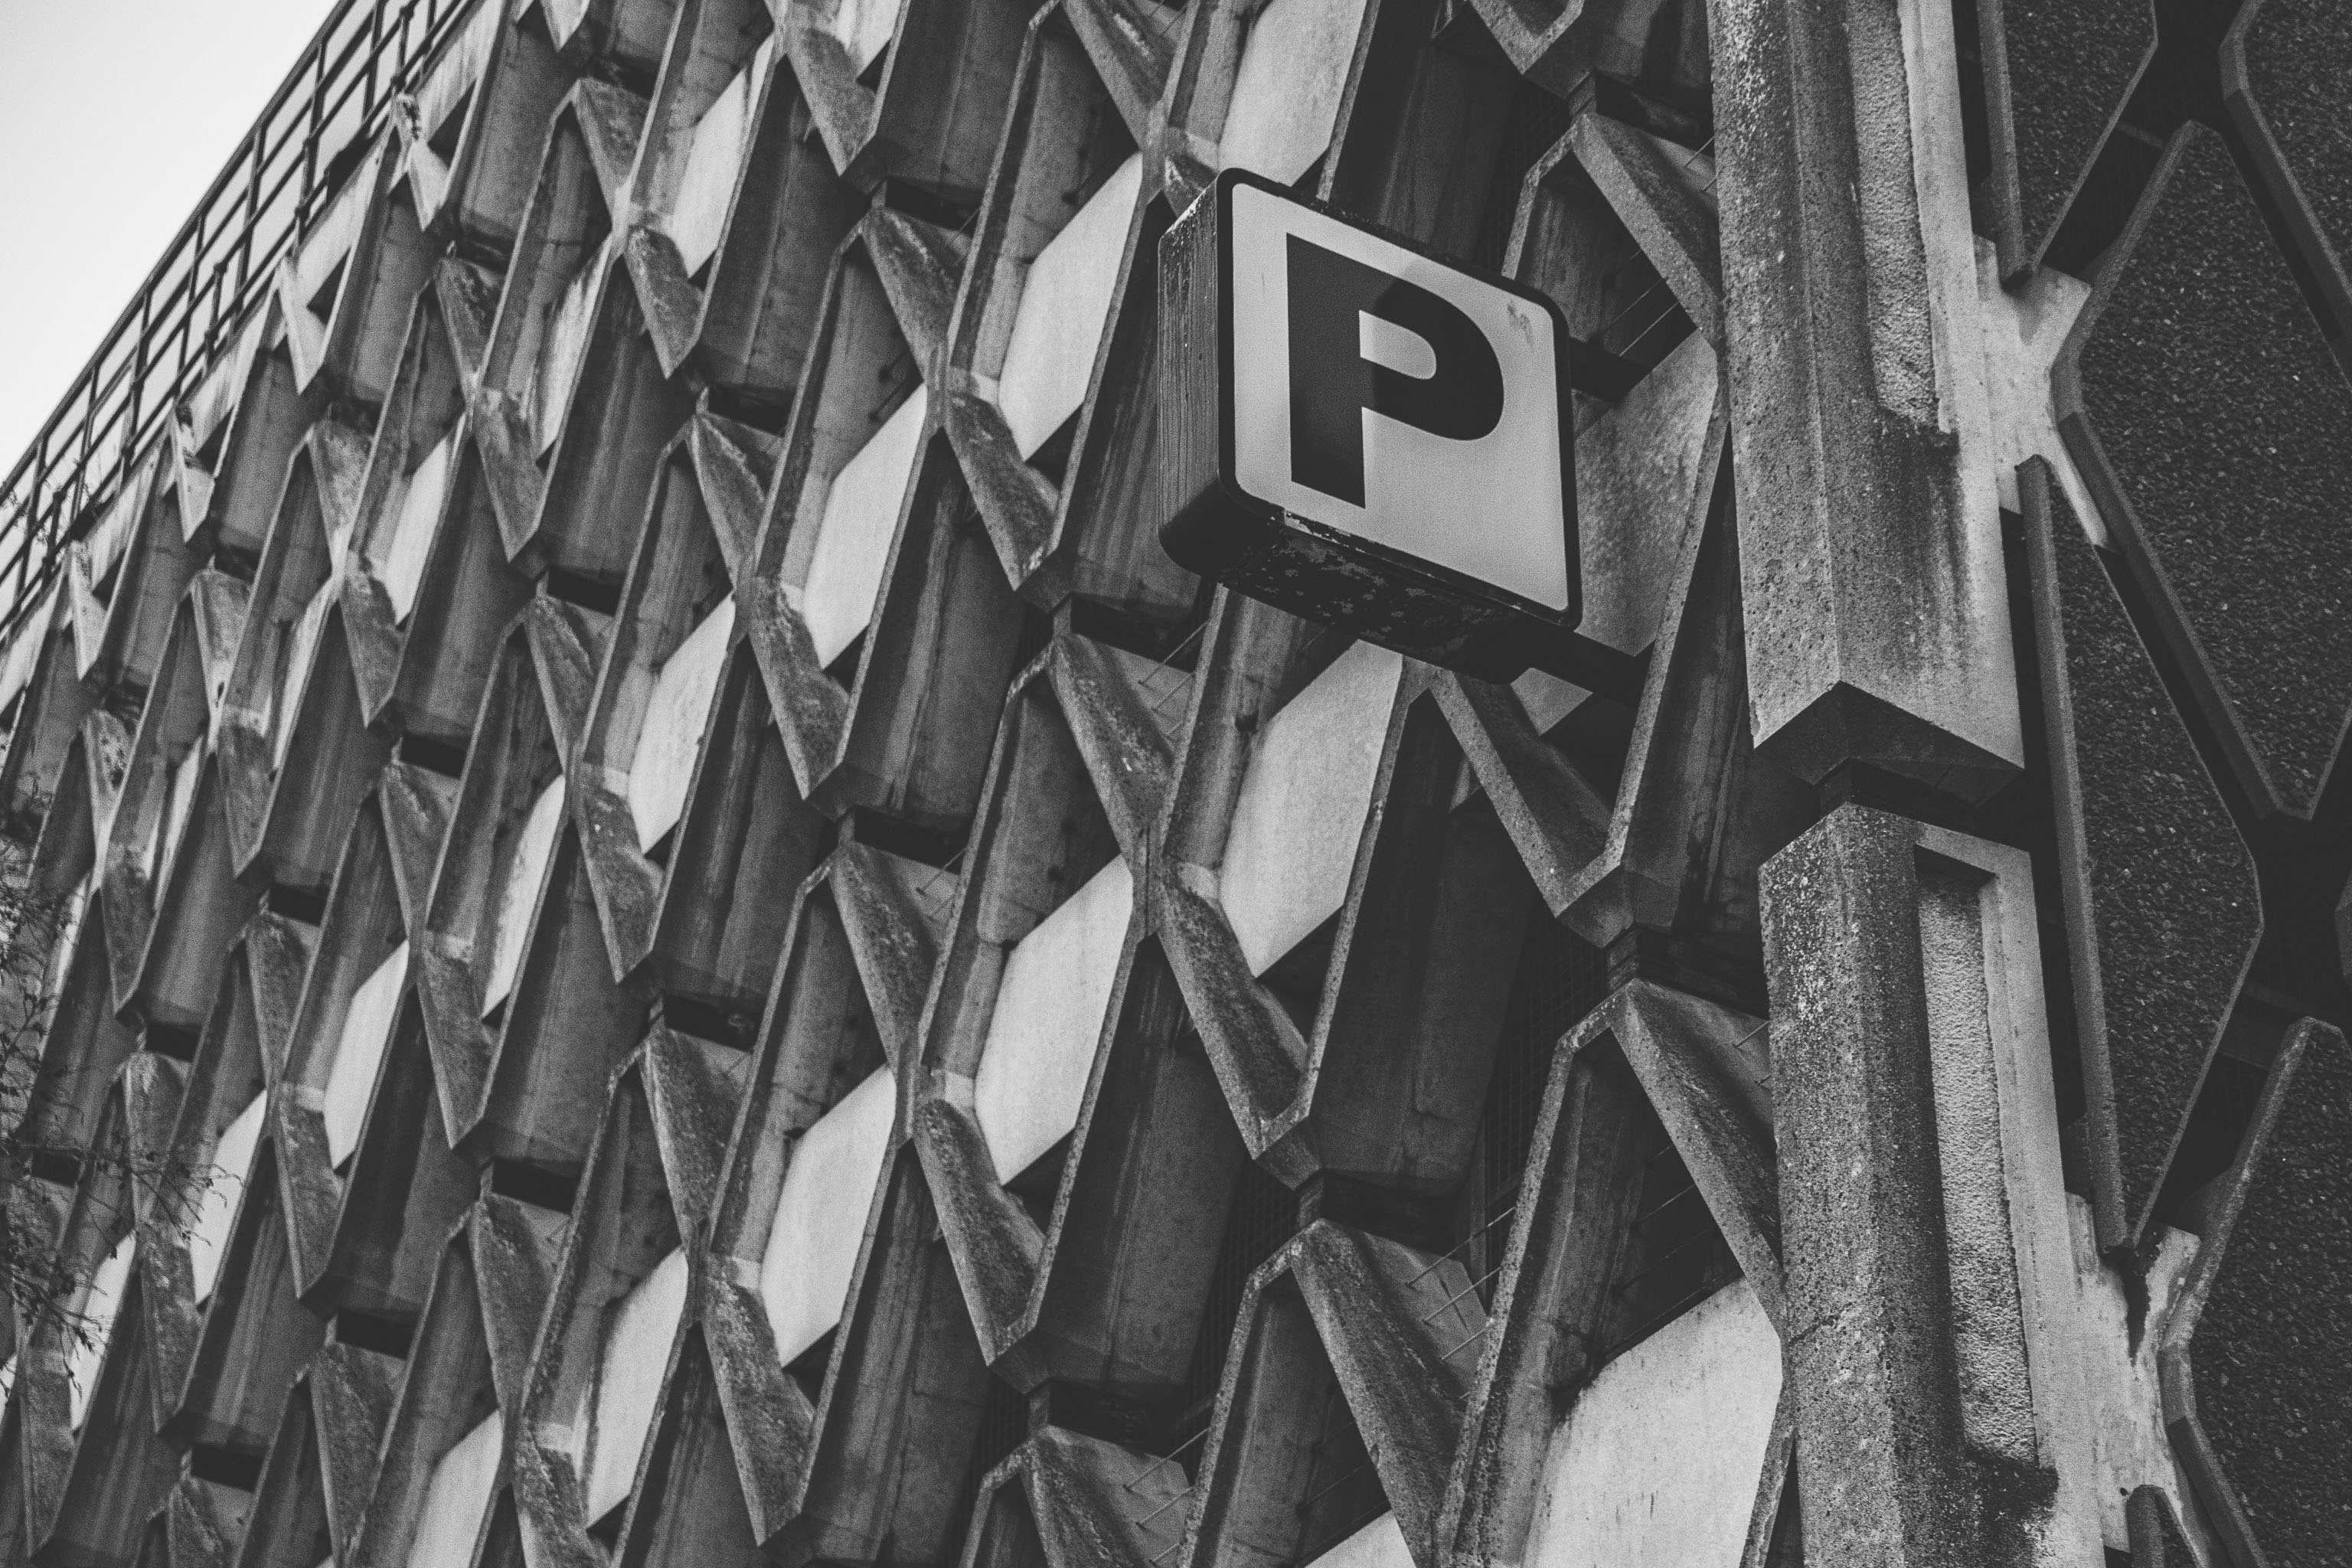 P
The NCP car park. Designed by Kenneth Wakeford Jarram & Harris in 1966, one of many brutalist Bristol buildings.
